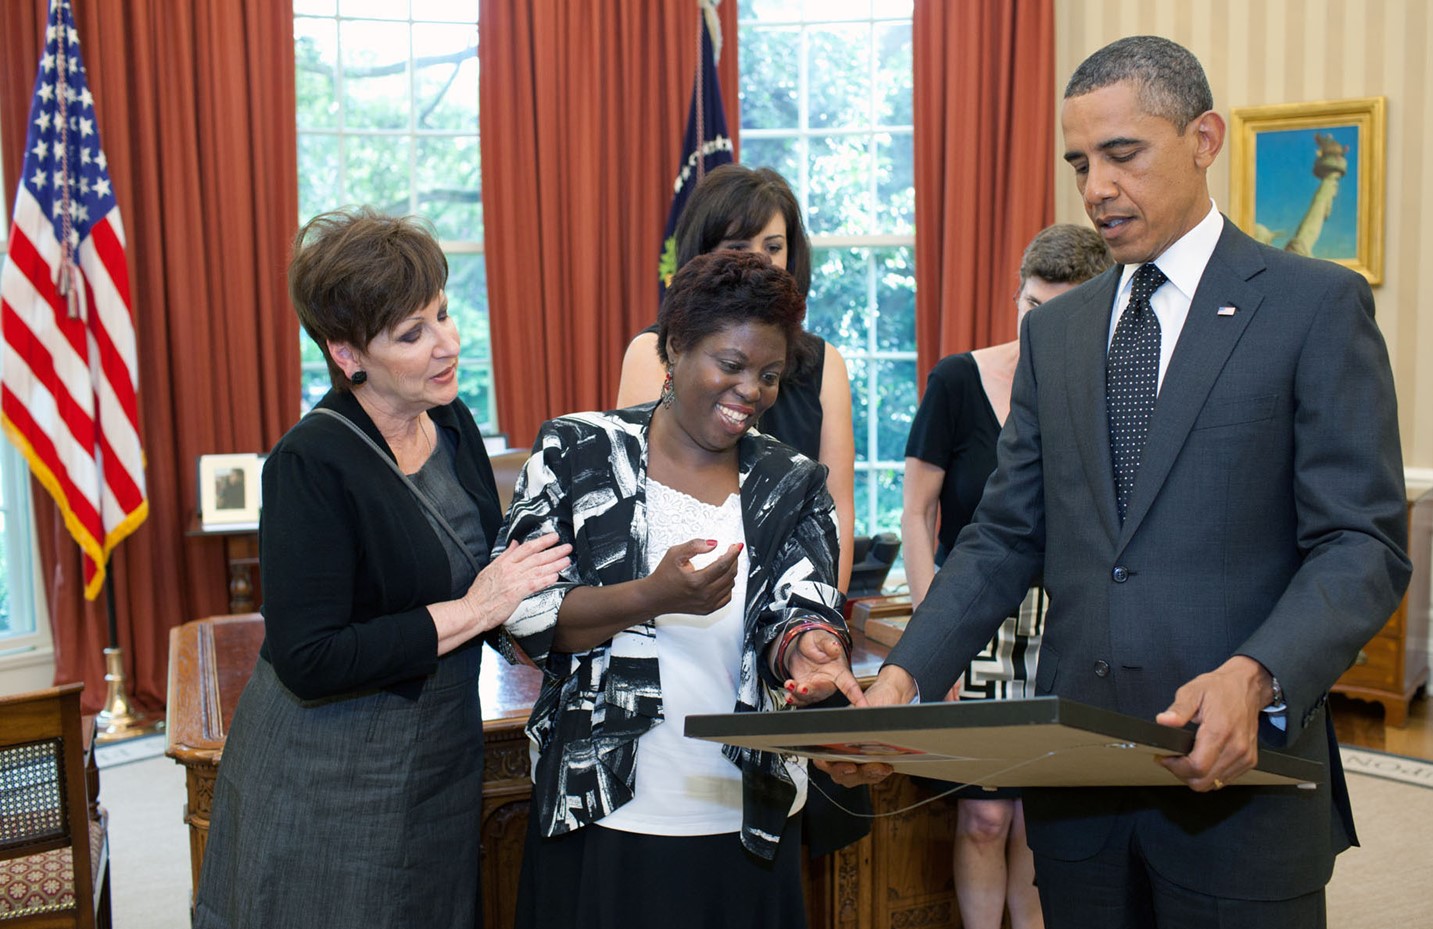 Lois Curtis, plaintiff in Olmstead v. L.C., (center) presents President Barack Obama with a self-portrait of herself as a child that she painted. The Oval Office, 20 June 2011